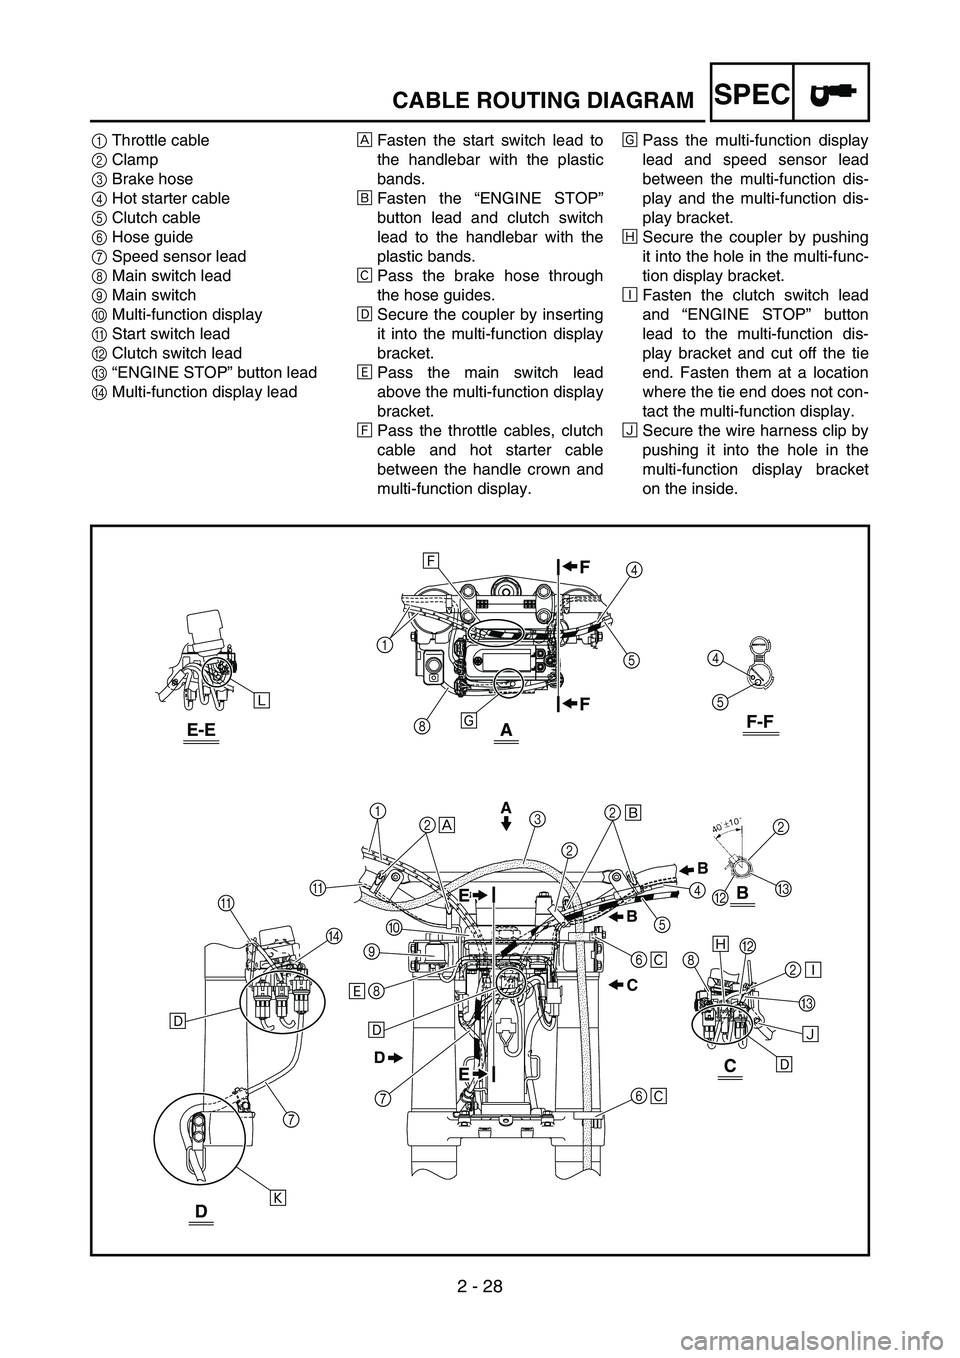 YAMAHA WR 450F 2006  Manuale de Empleo (in Spanish) 2 - 28
SPECCABLE ROUTING DIAGRAM
1Throttle cable 
2Clamp
3Brake hose 
4Hot starter cable
5Clutch cable
6Hose guide
7Speed sensor lead
8Main switch lead
9Main switch
0Multi-function display
AStart swit